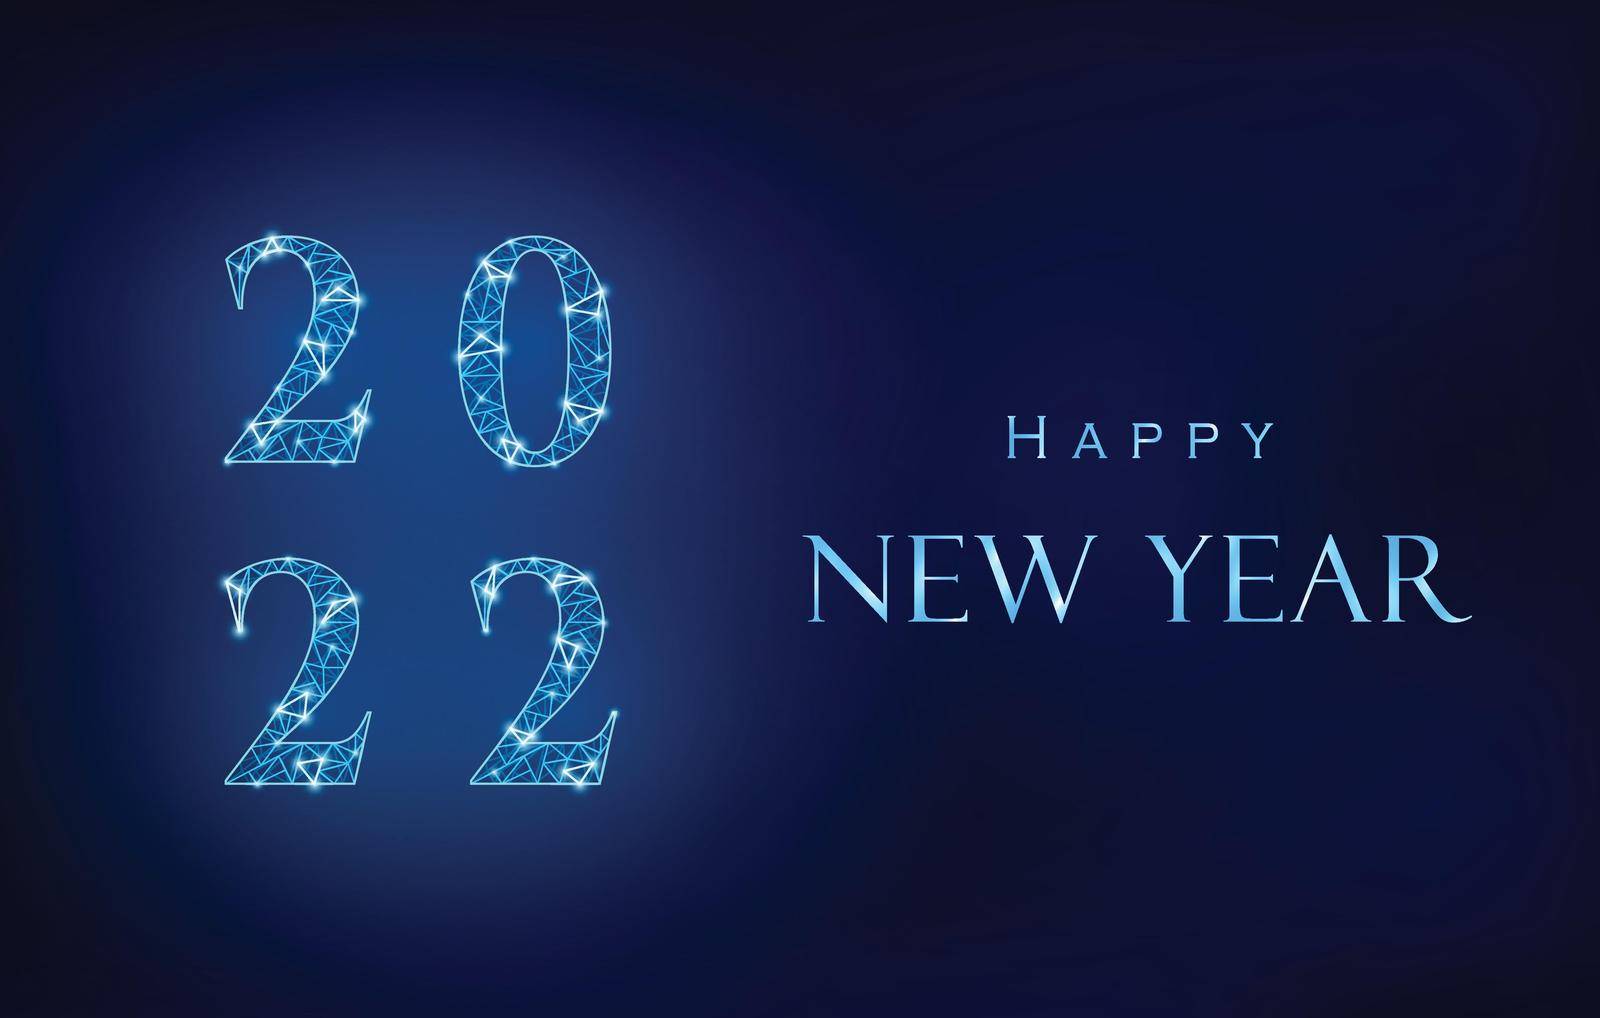 Blue Happy New Year design. 2022 from polygonal mesh with light points. Next to it shiny metallic effect greeting text.